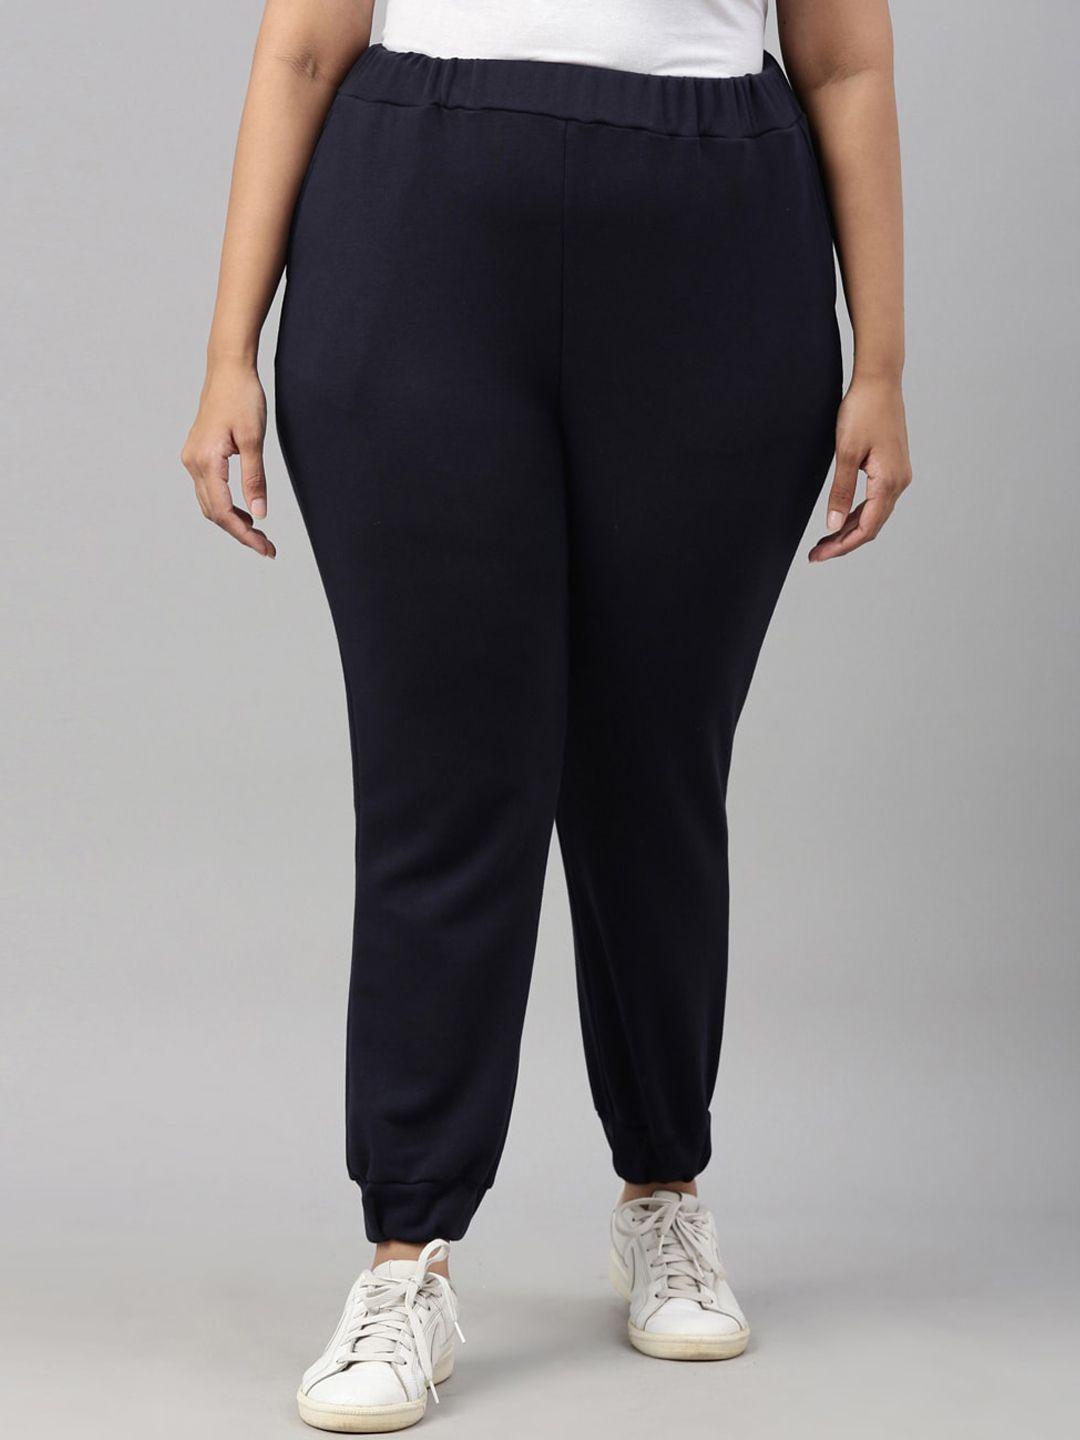 the-pink-moon-women-plus-size-navy-blue-solid-straight-fit-pure-cotton-joggers